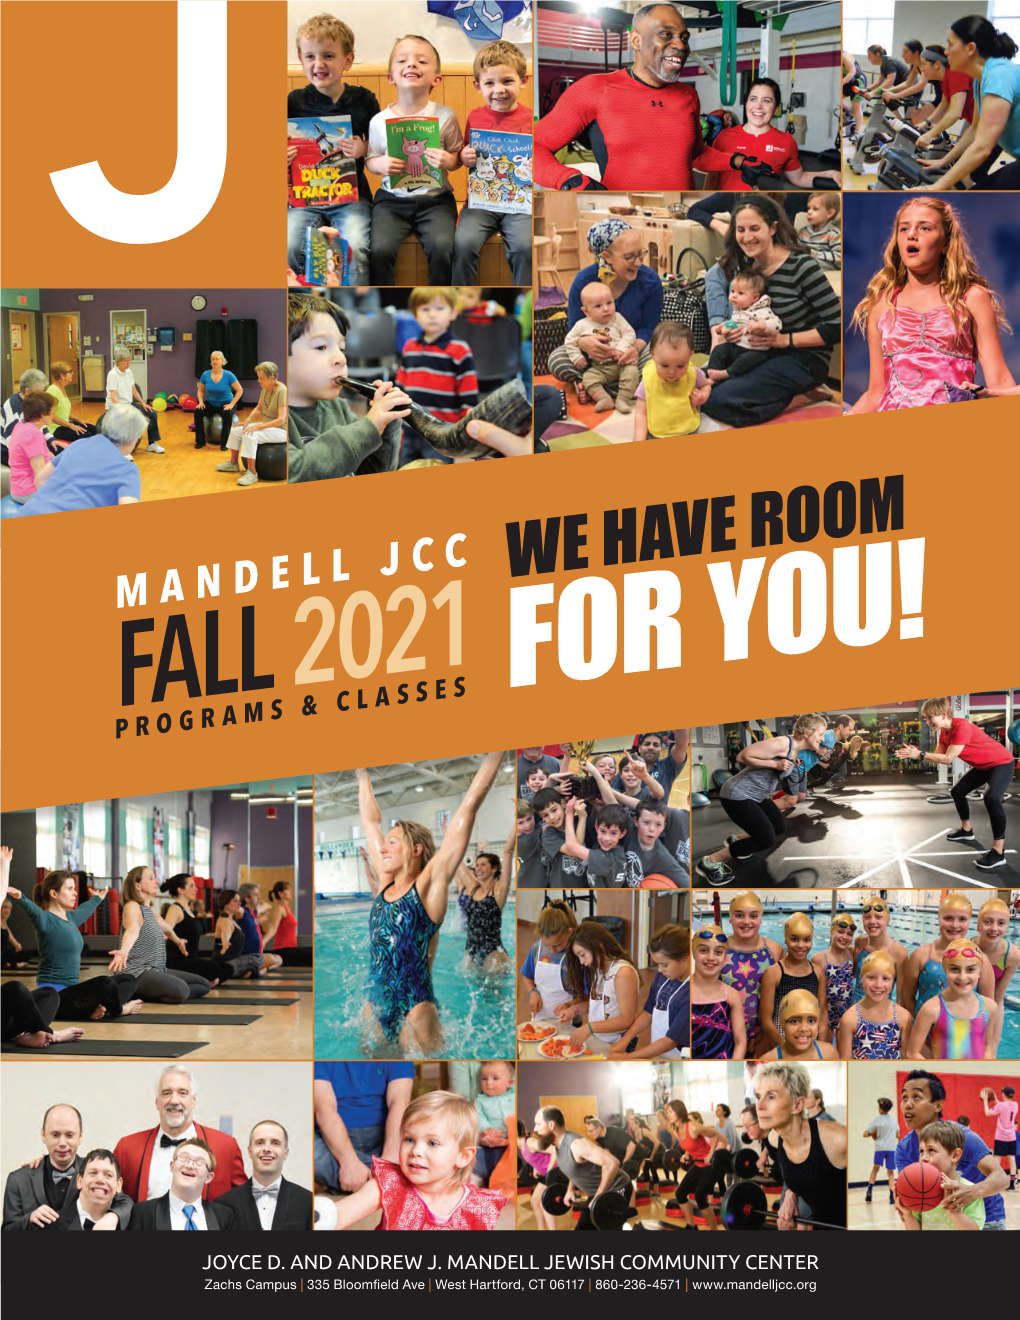 We Have Room for You! Fallprograms 2021& Classes